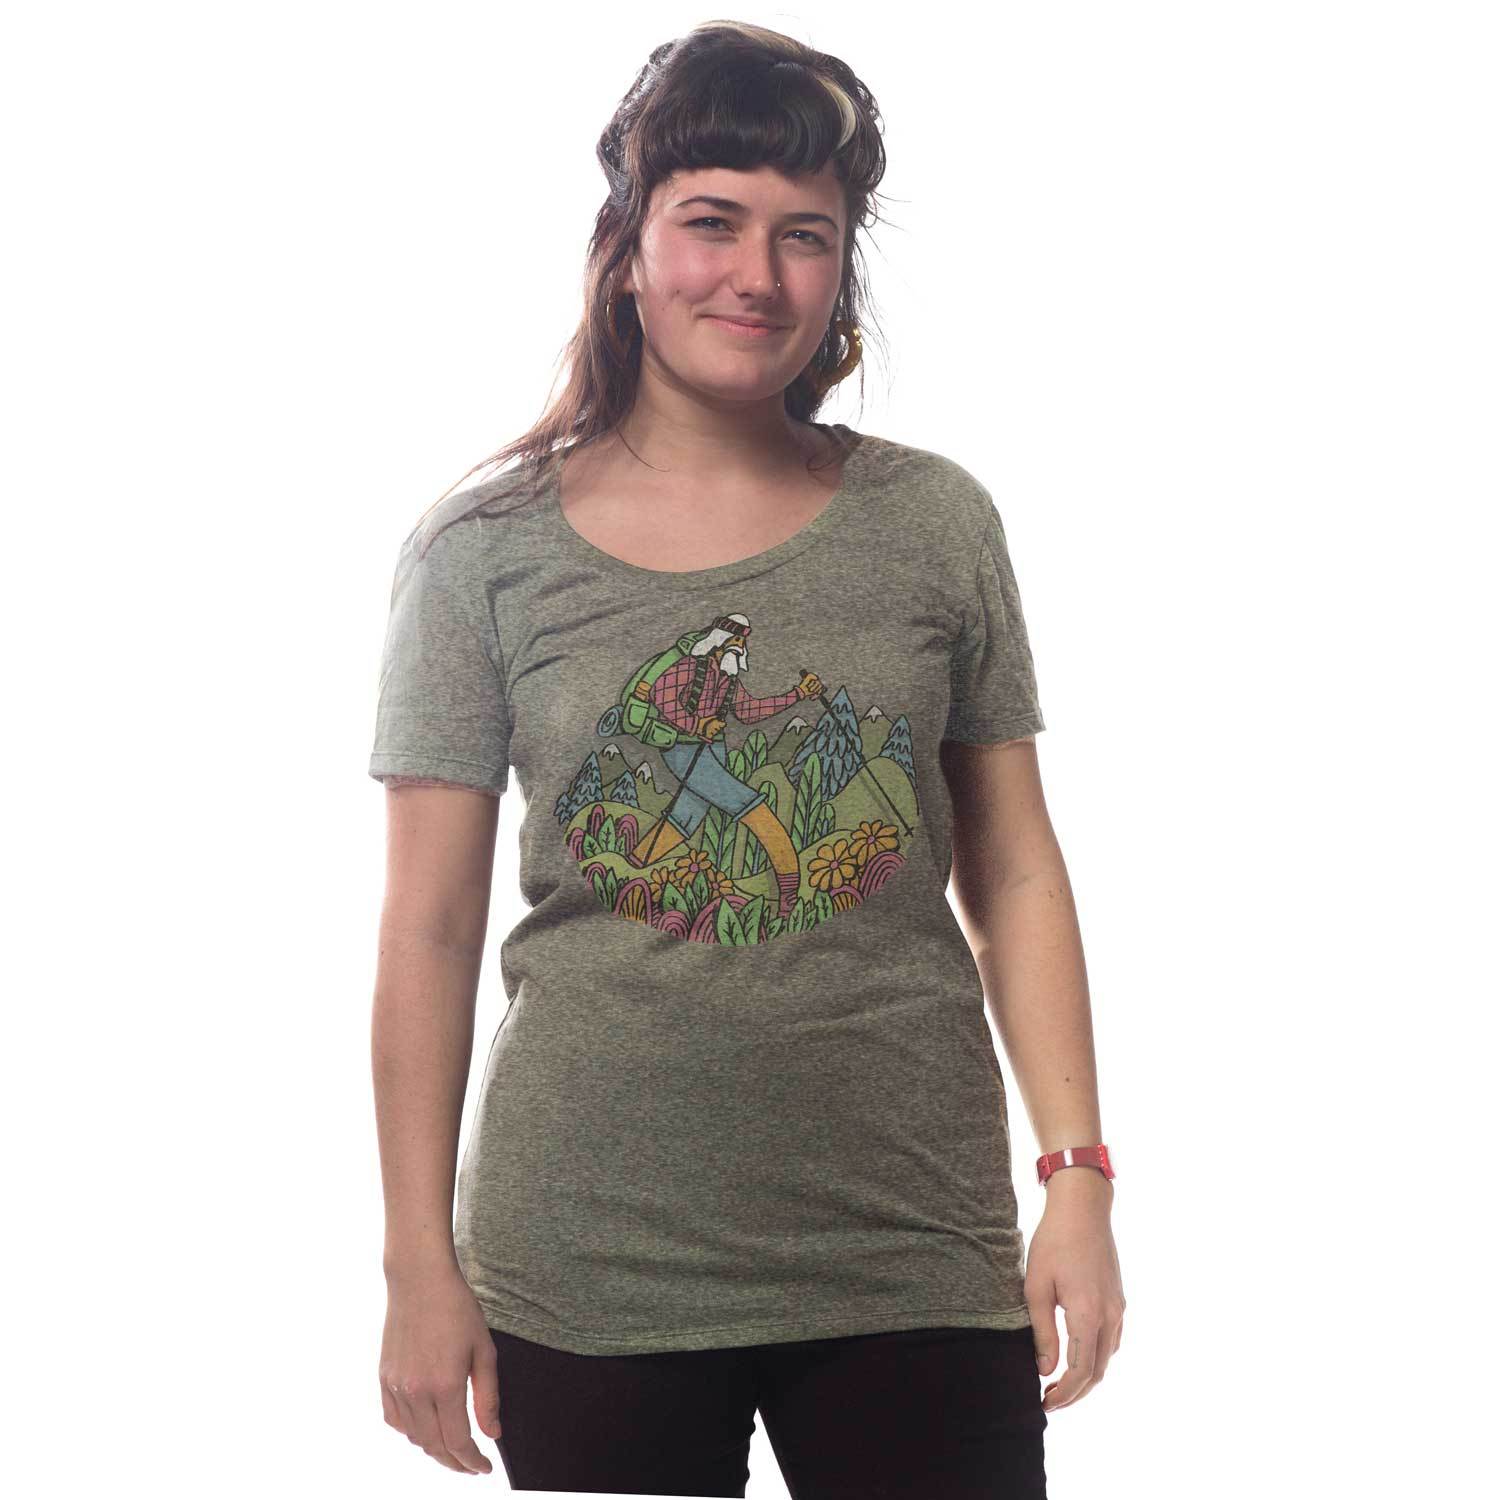 Women's Wise Hiker Vintage Mountain Graphic Tee | Retro Outdoorsy T-shirt on Model | Solid Threads